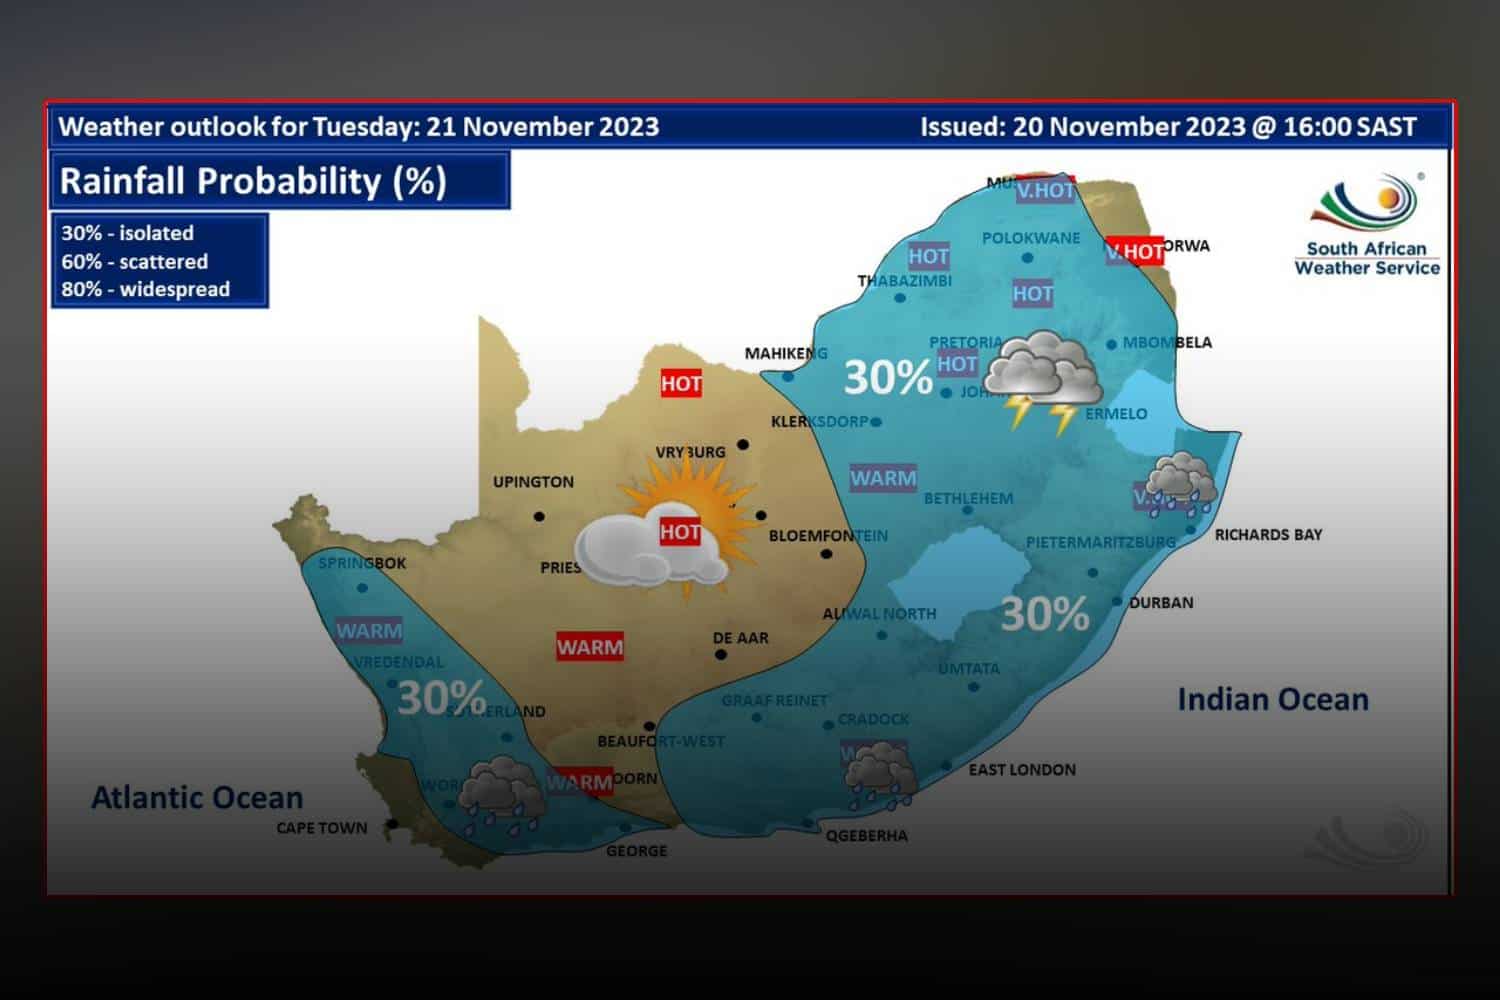 south africa weather forecast Tuesday 21 November 2023